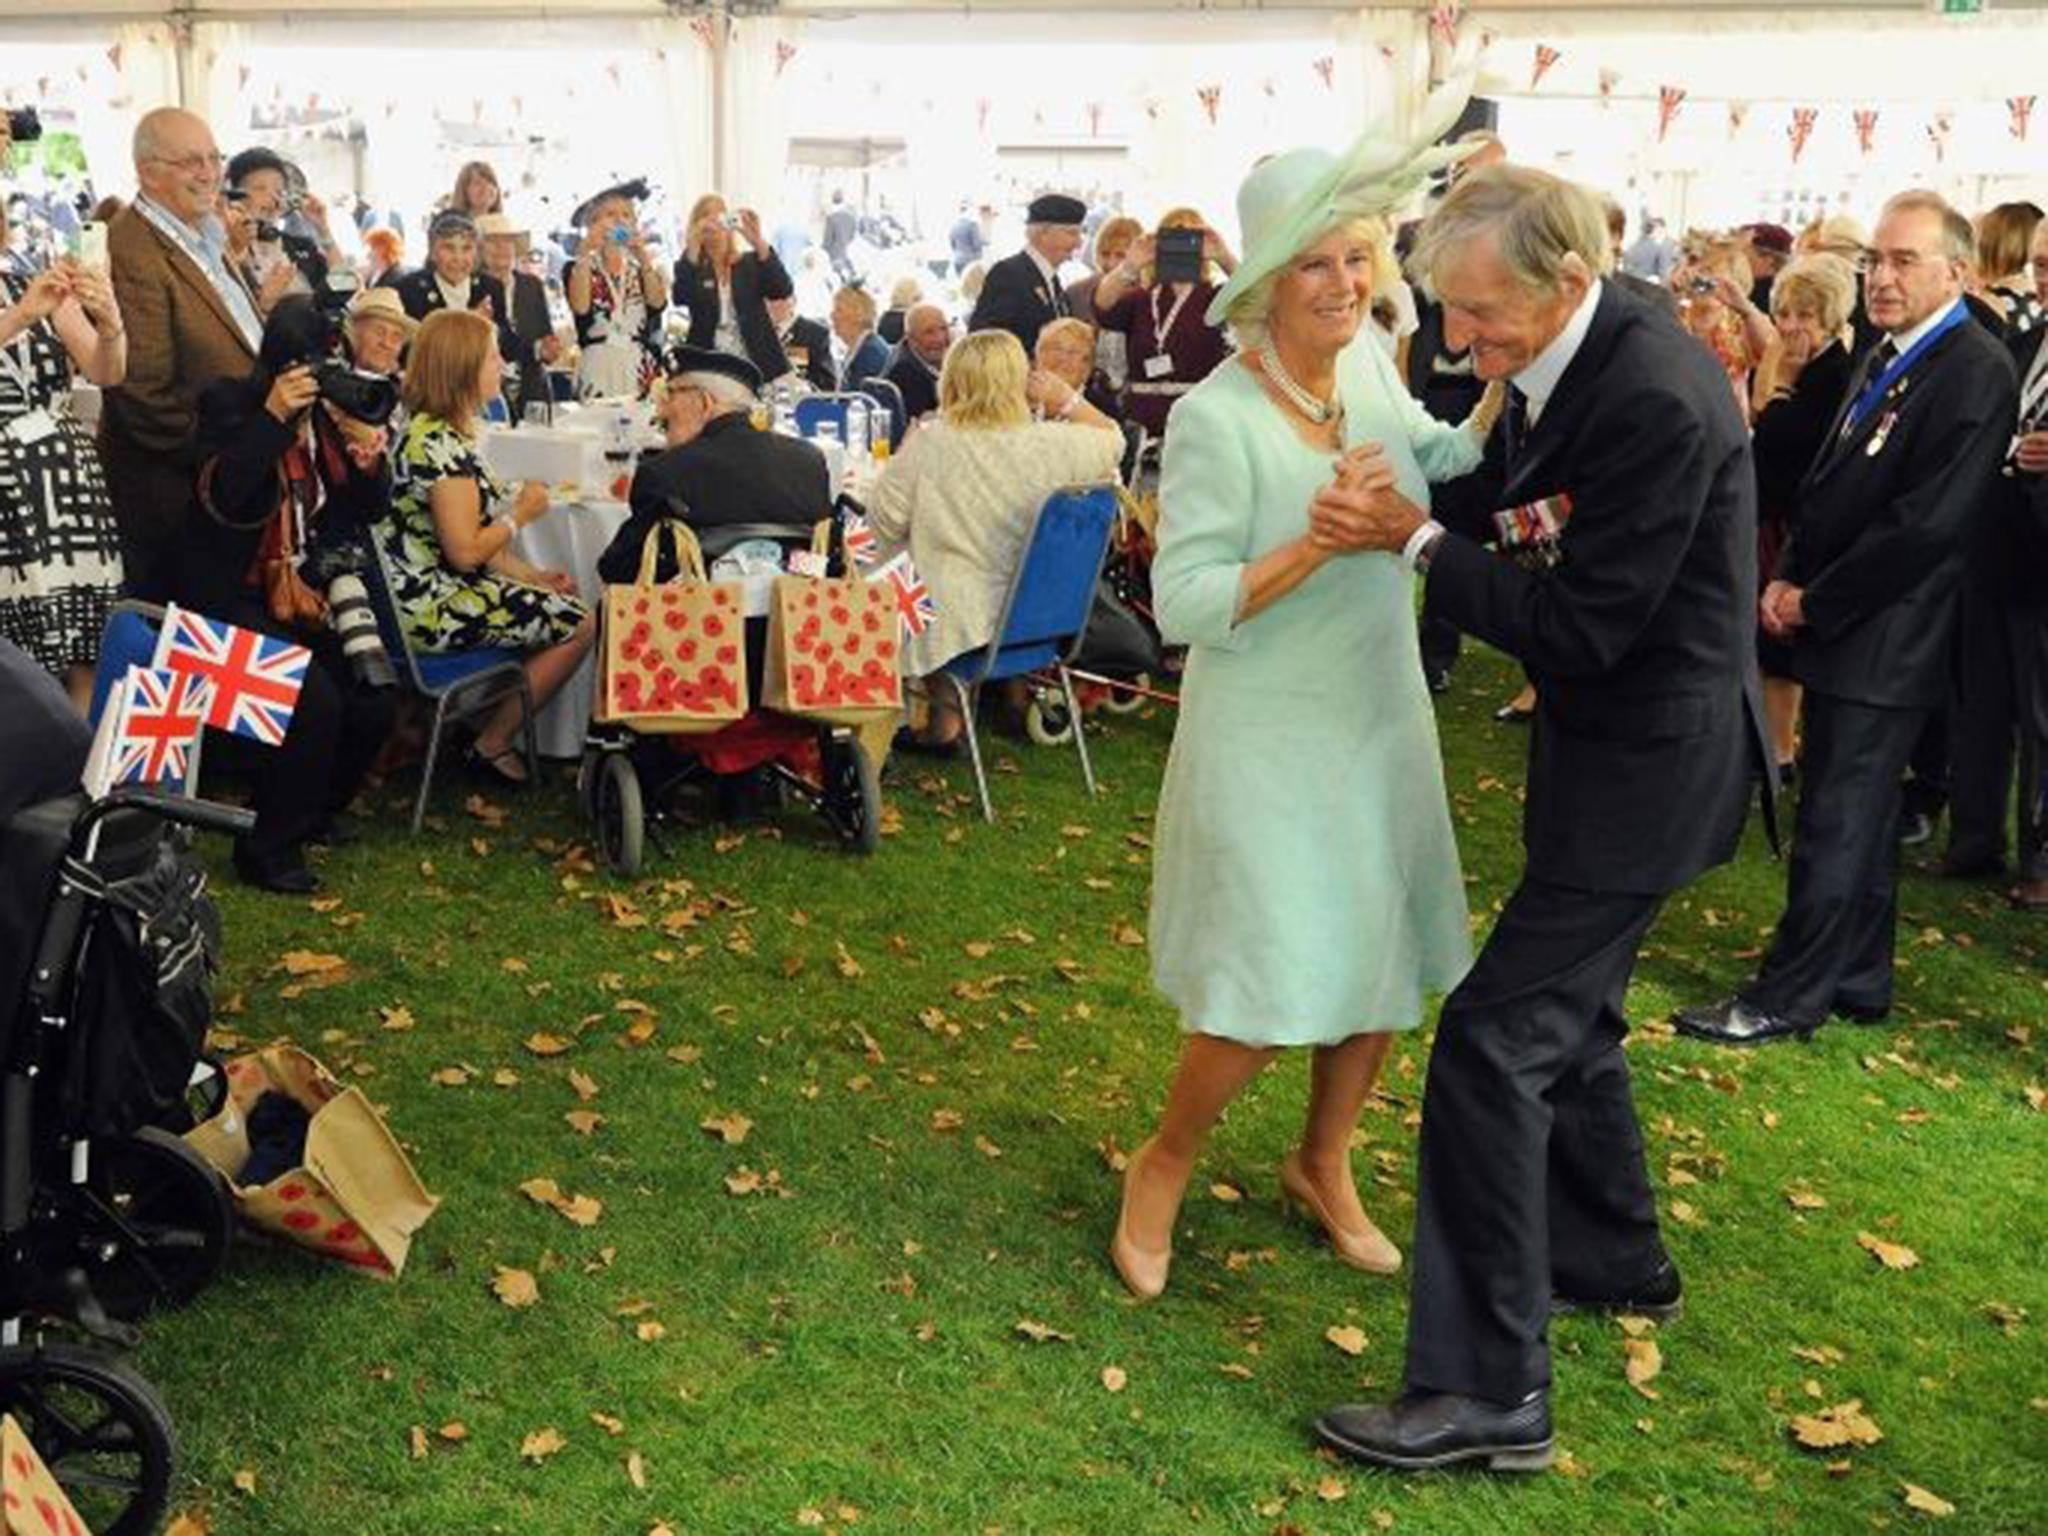 Jim Booth, pictured dancing with Camilla, Duchess of Cornwall in 2015, was subjected to the brutal attack at his home on Wednesday afternoon